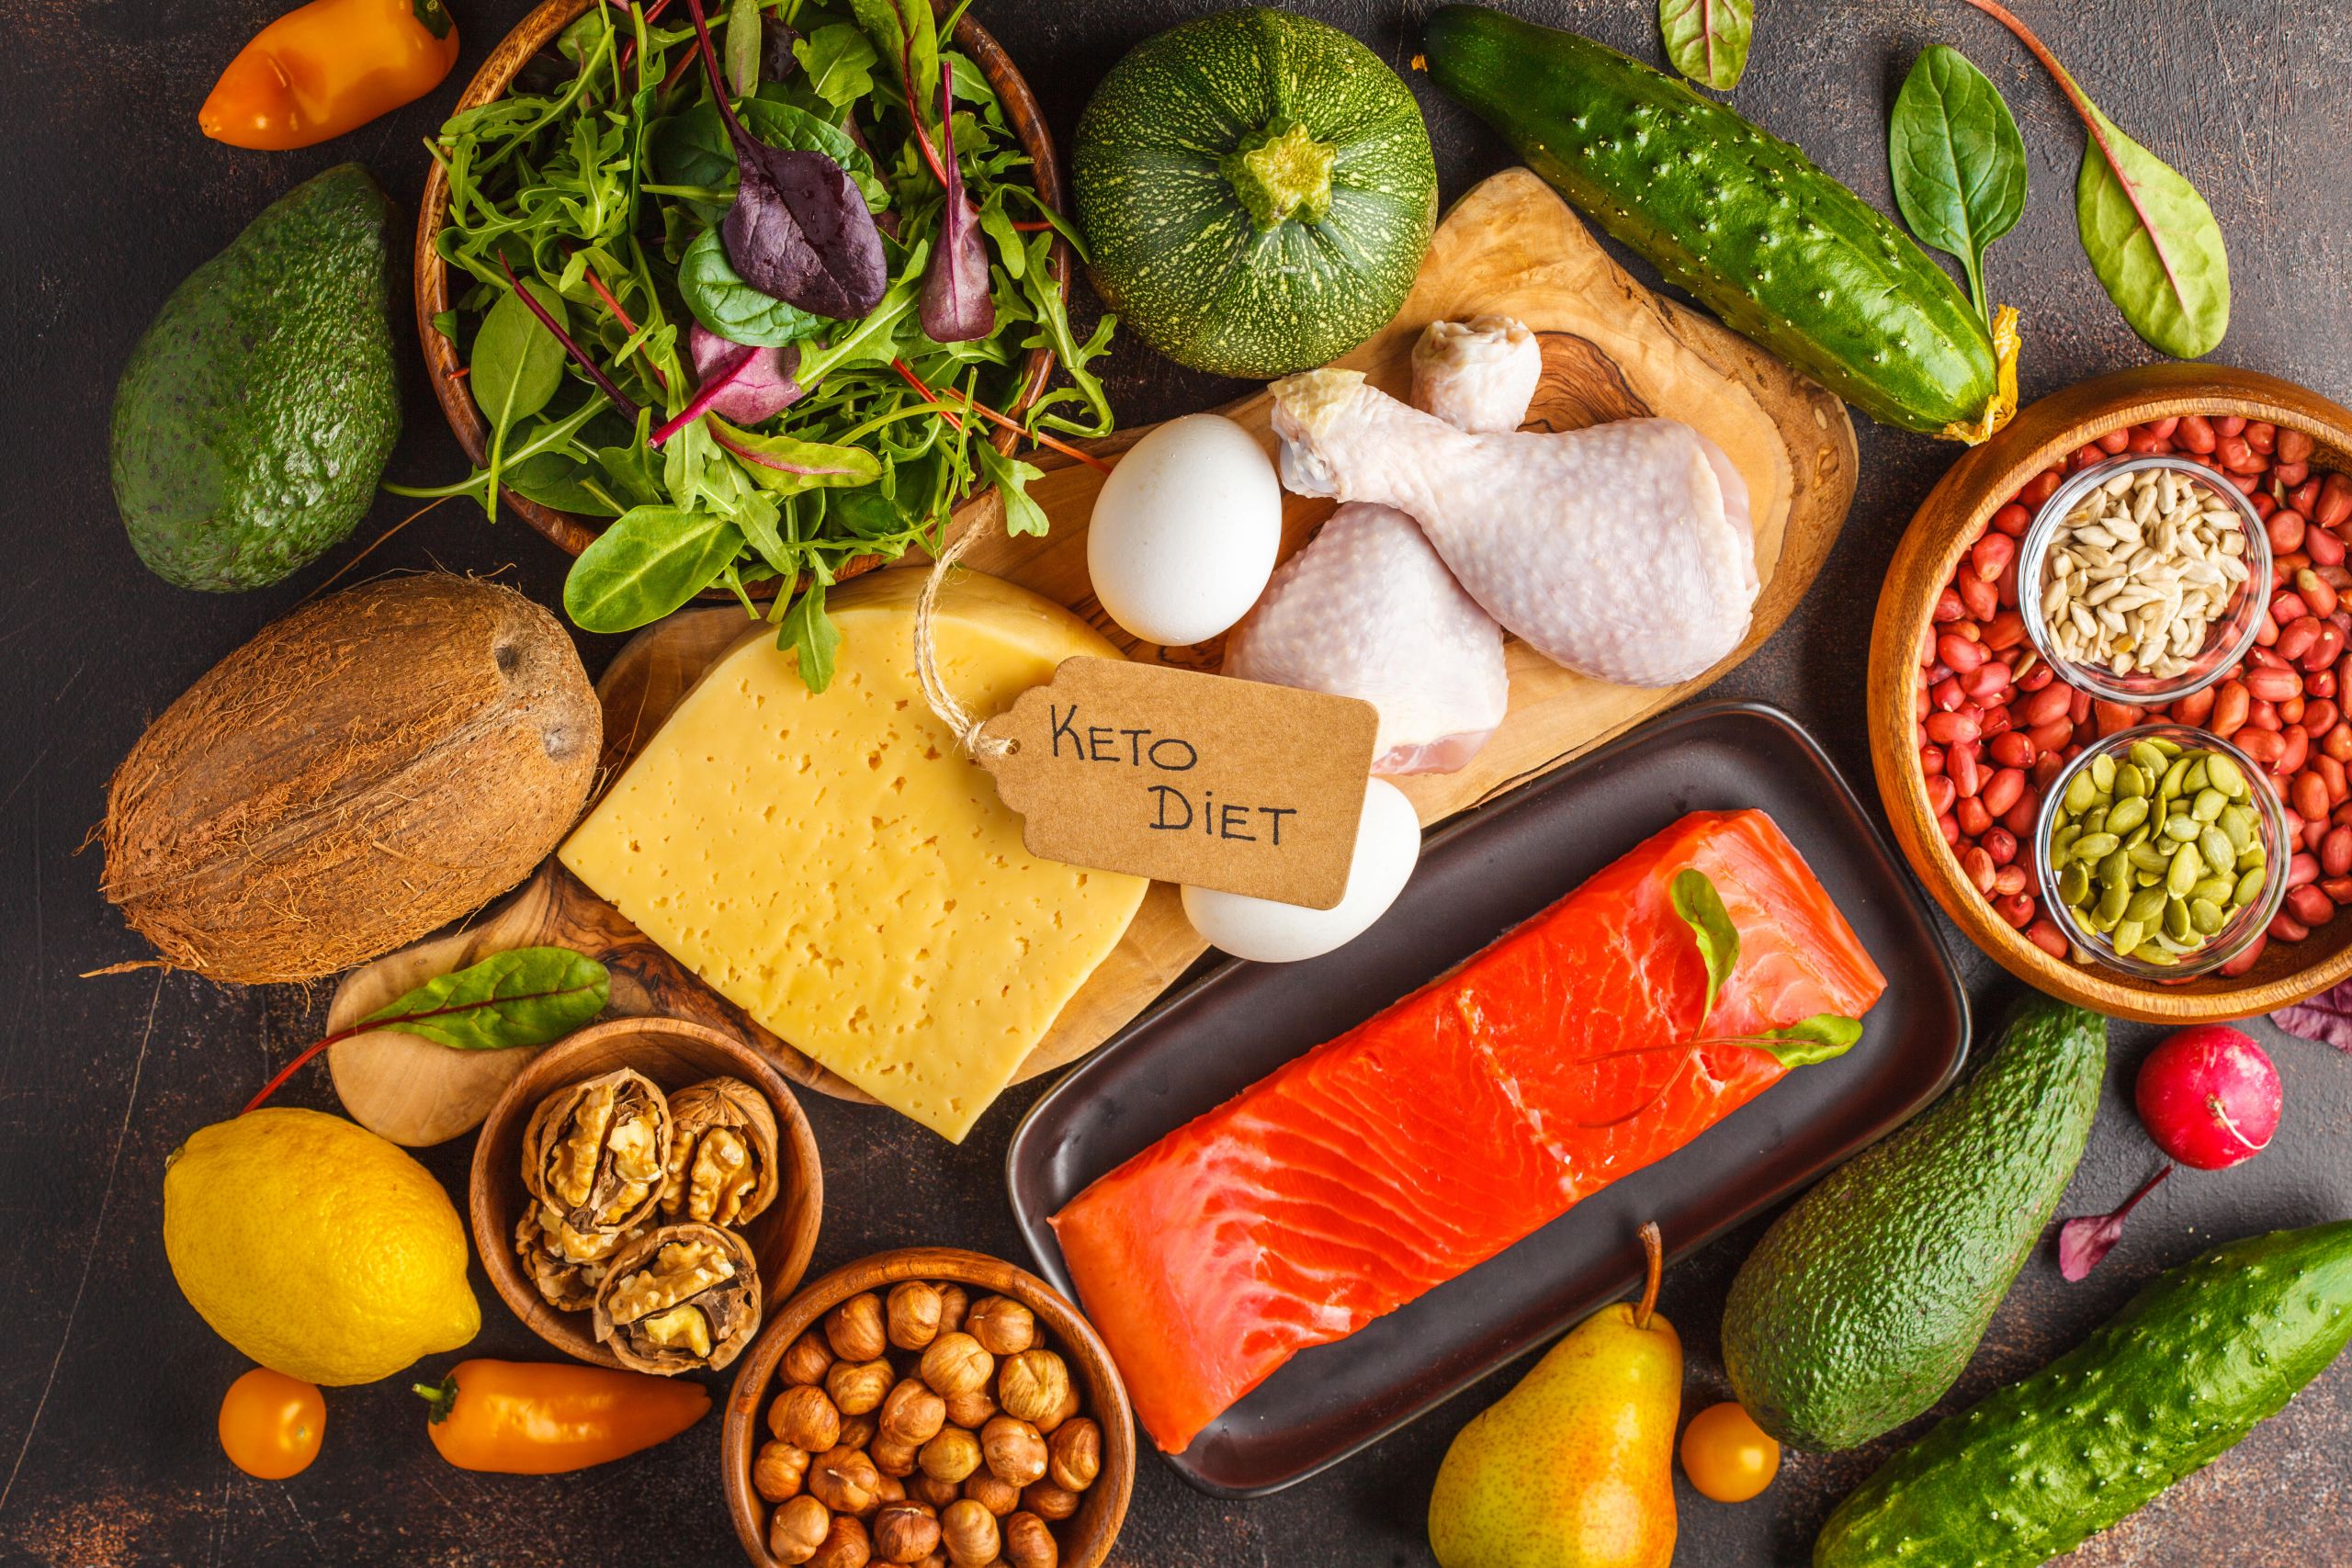 Keto Diet And Pregnancy
 Is A Keto Diet Safe If You’re Pregnant